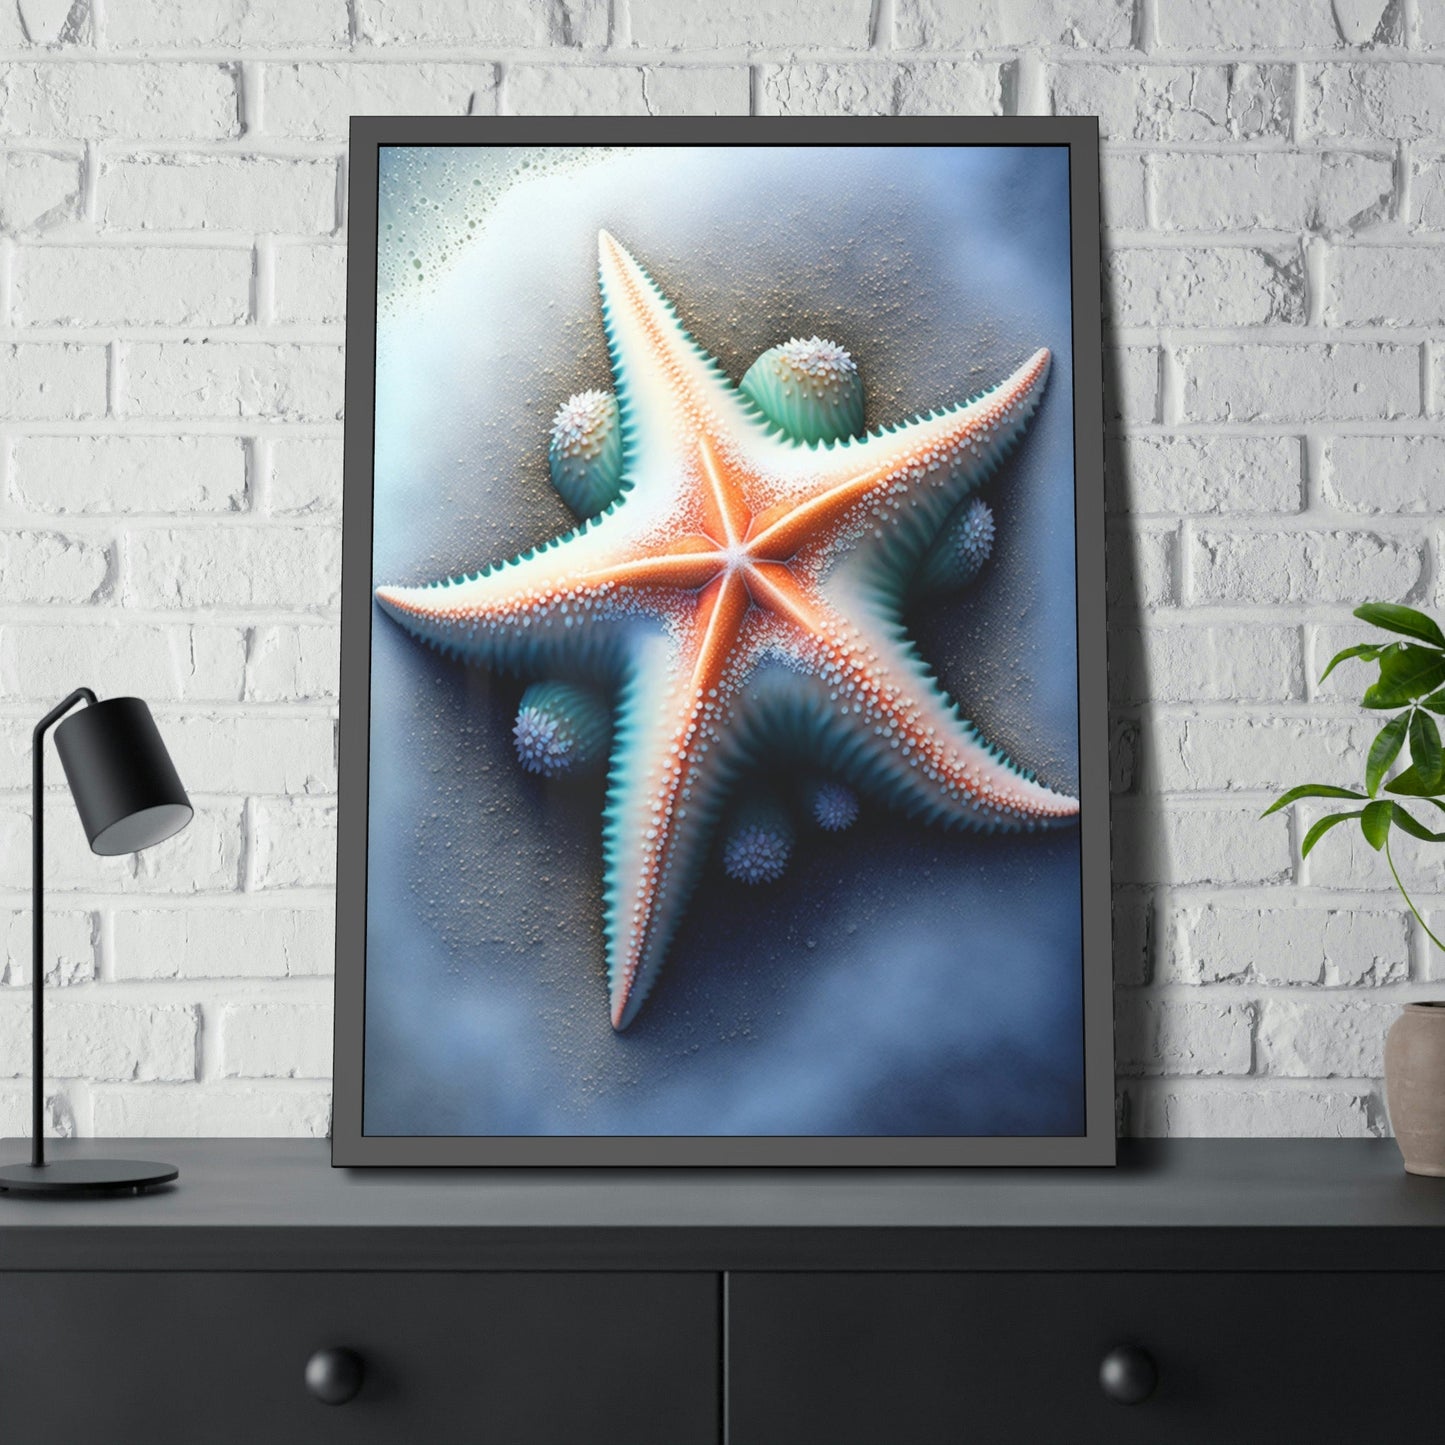 Whispers of the Sea: Starfish Edition